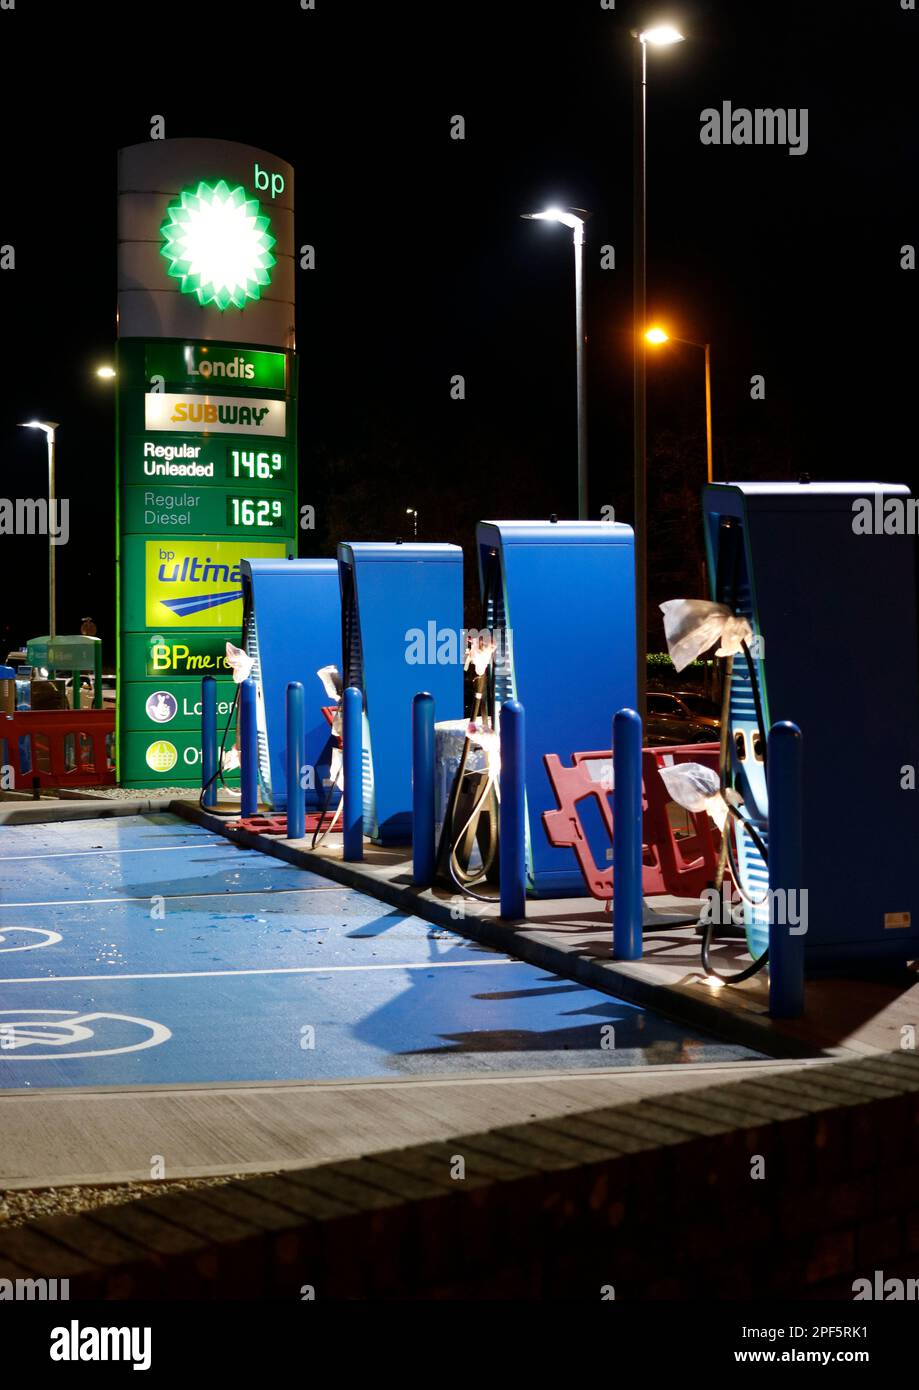 BP EV Electric Vehicle Charging bays being installed at BP service station forecourt - electric car charging points in petrol station forecourts, UK Stock Photo